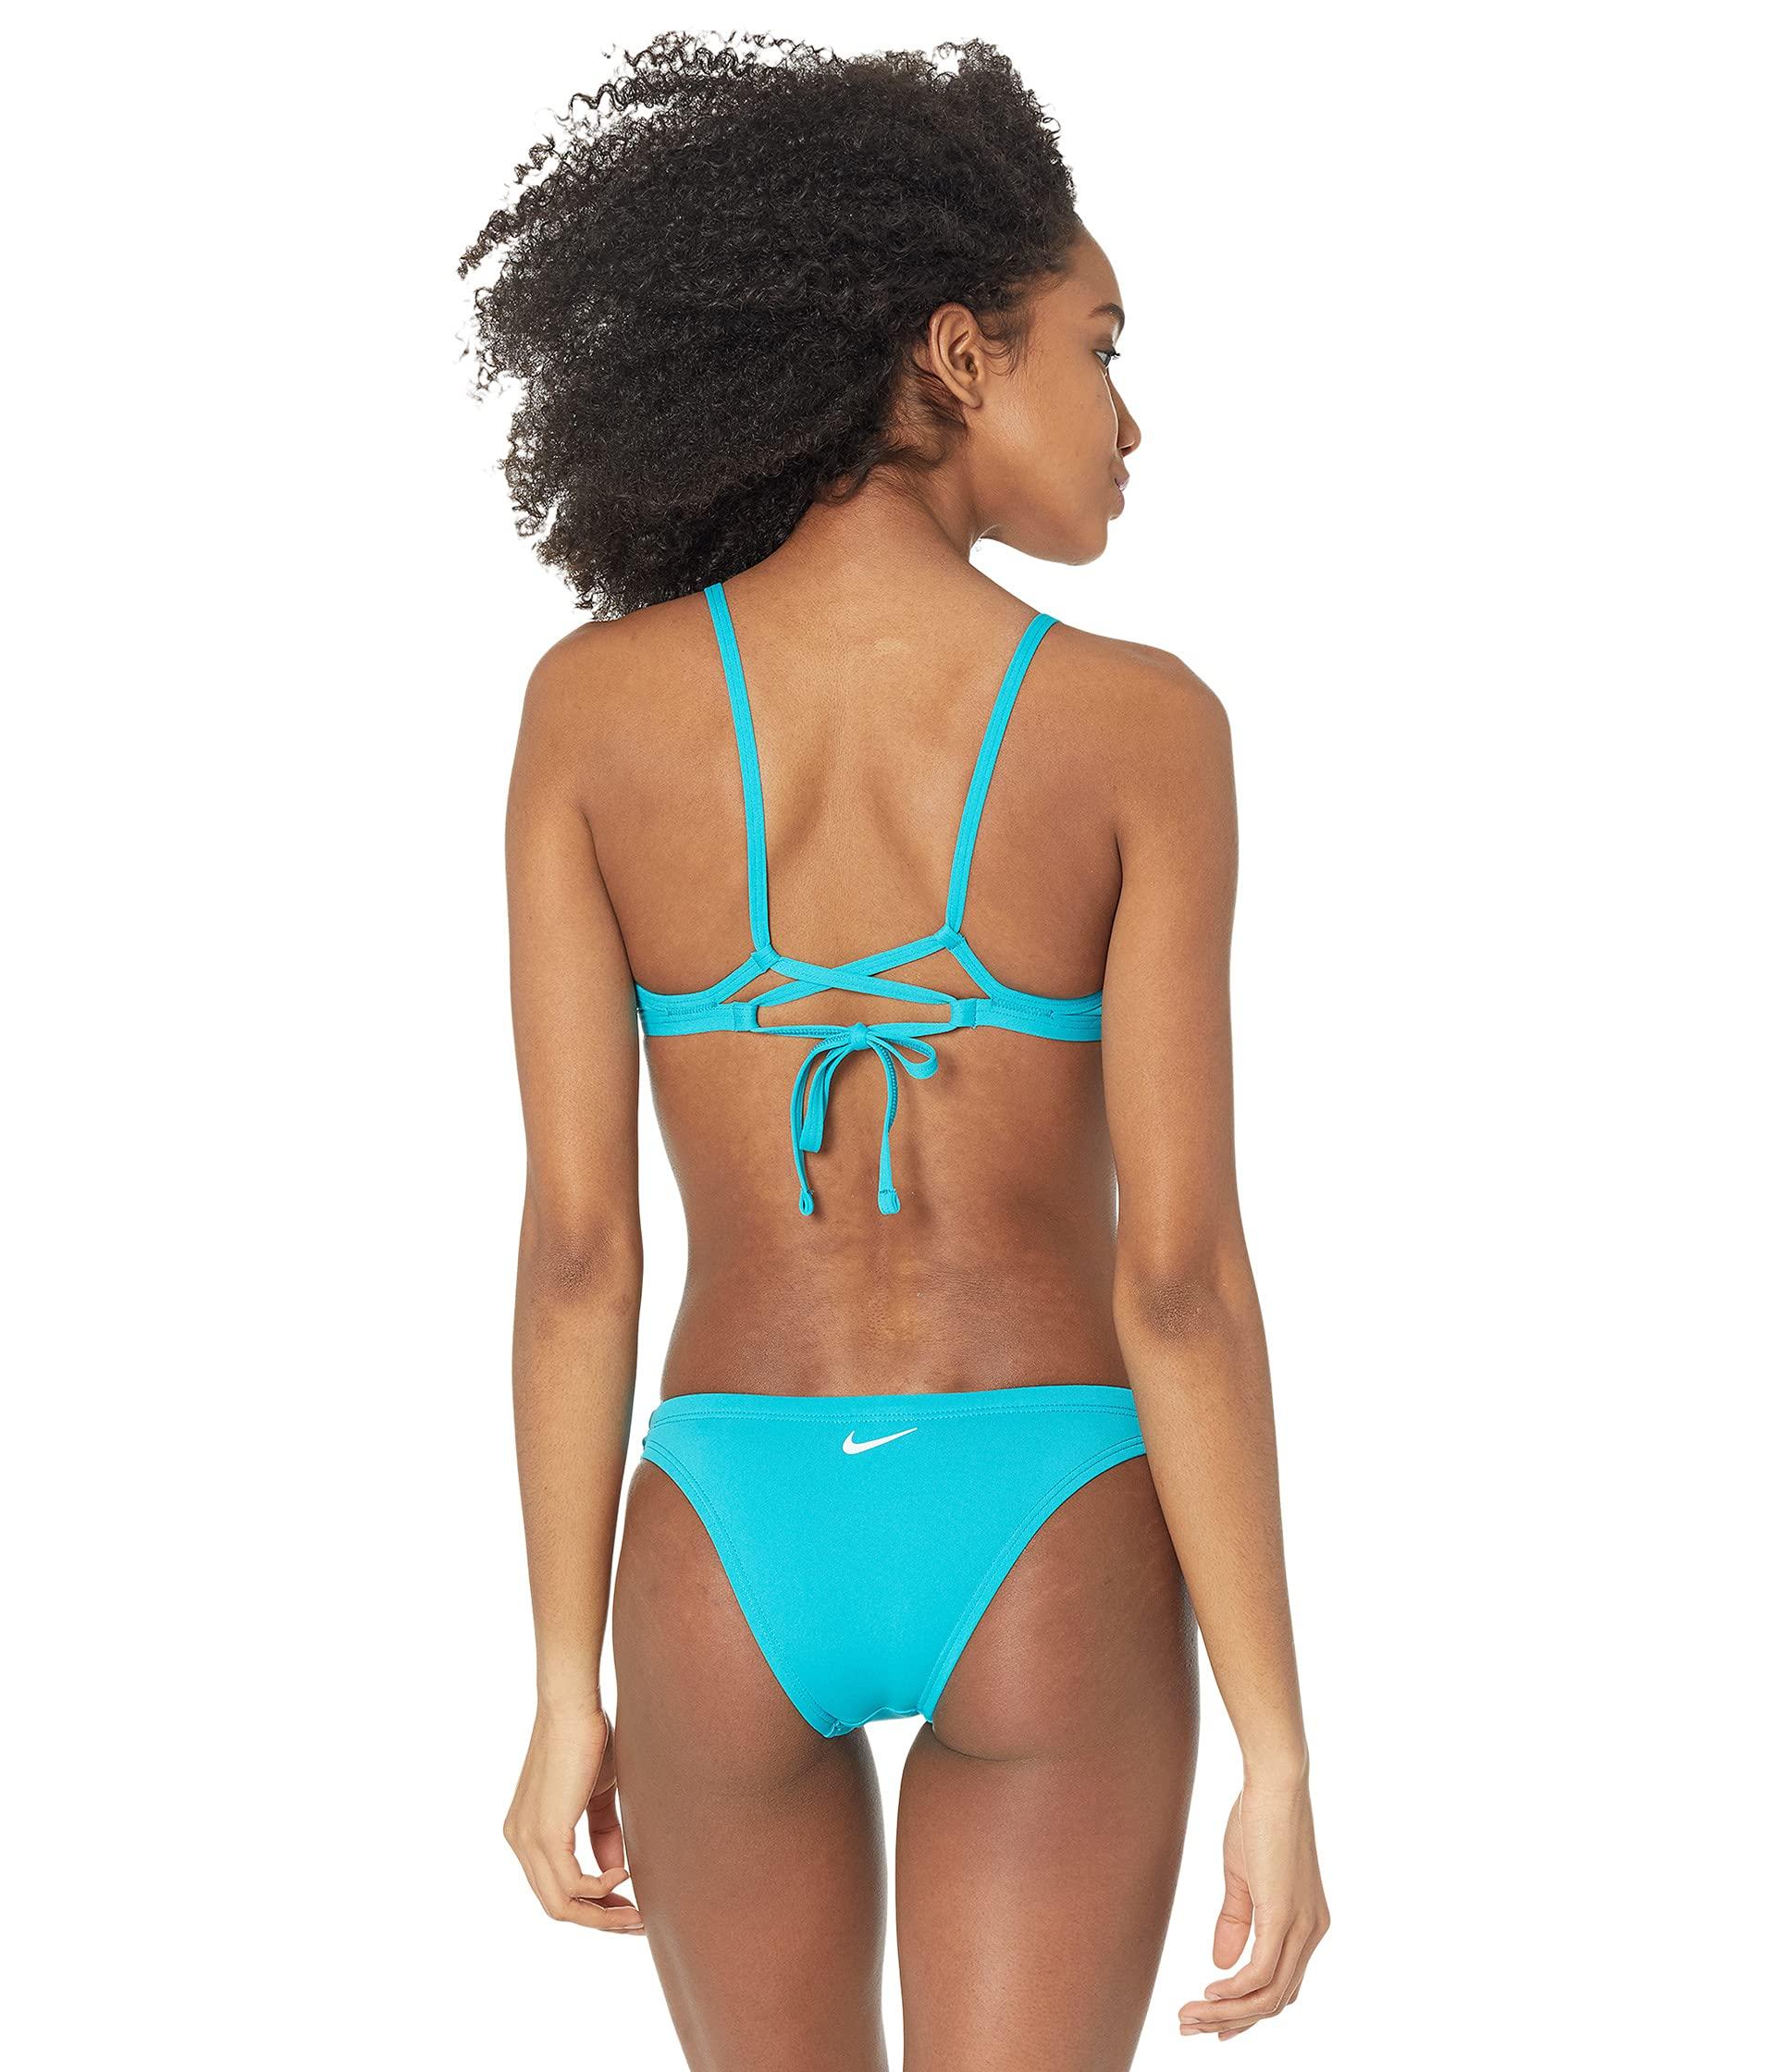 Nike Synthetic Hydrastrong Solid Tie Back Bikini Top in Blue - Lyst